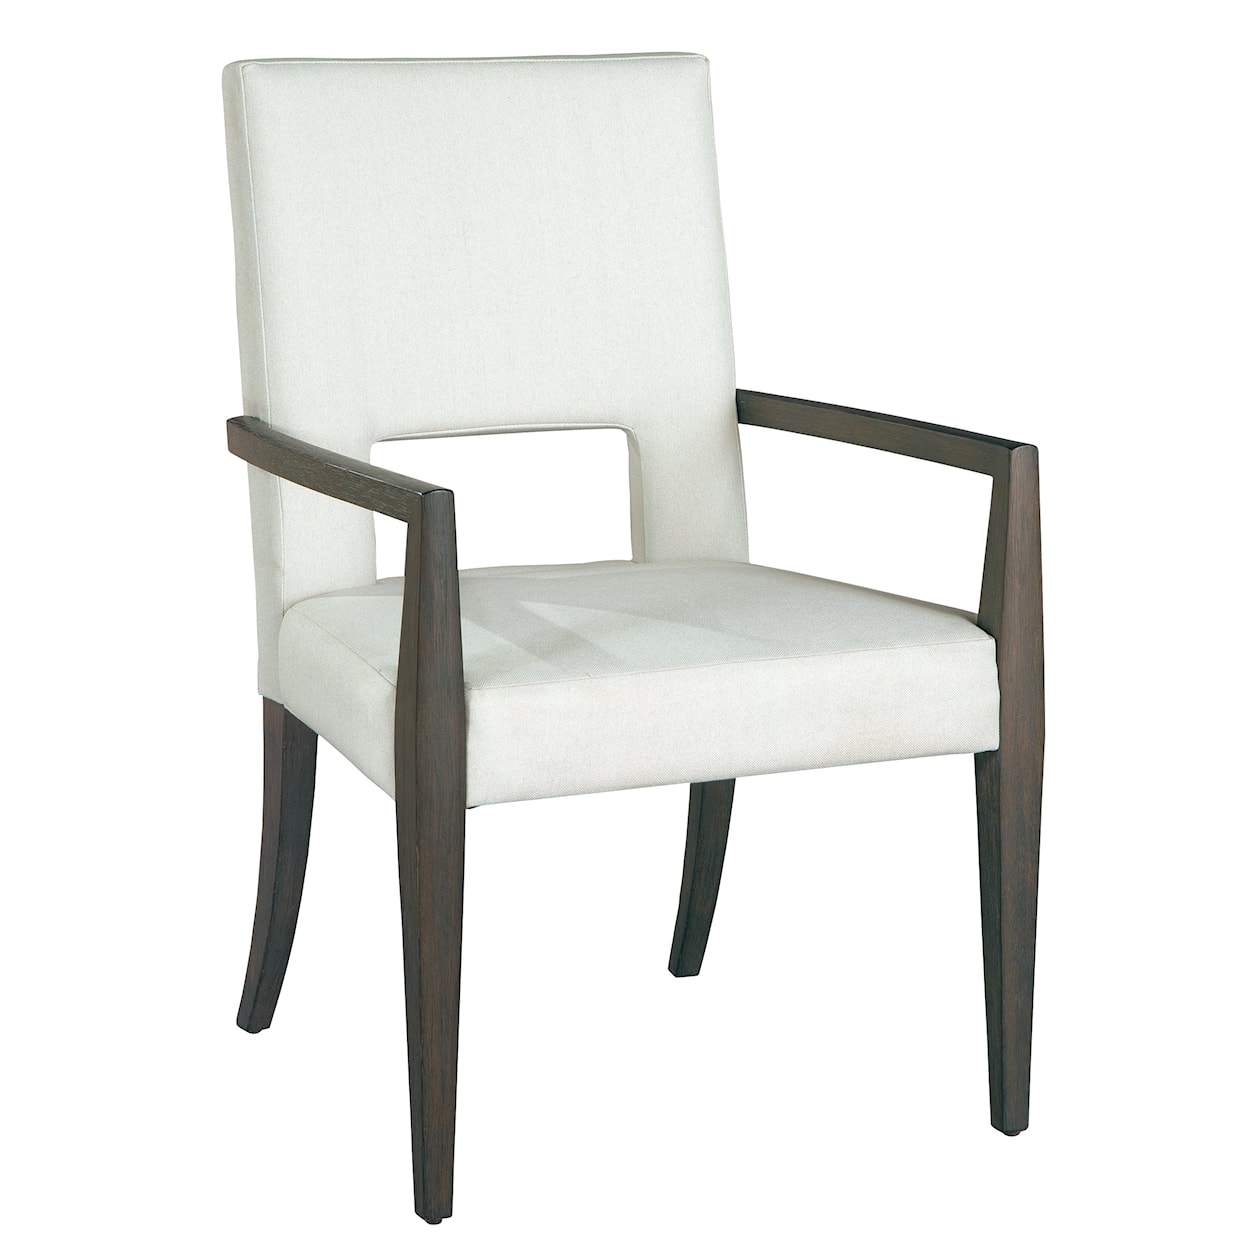 Hekman Edgewater Upholstered Dining Arm Chair